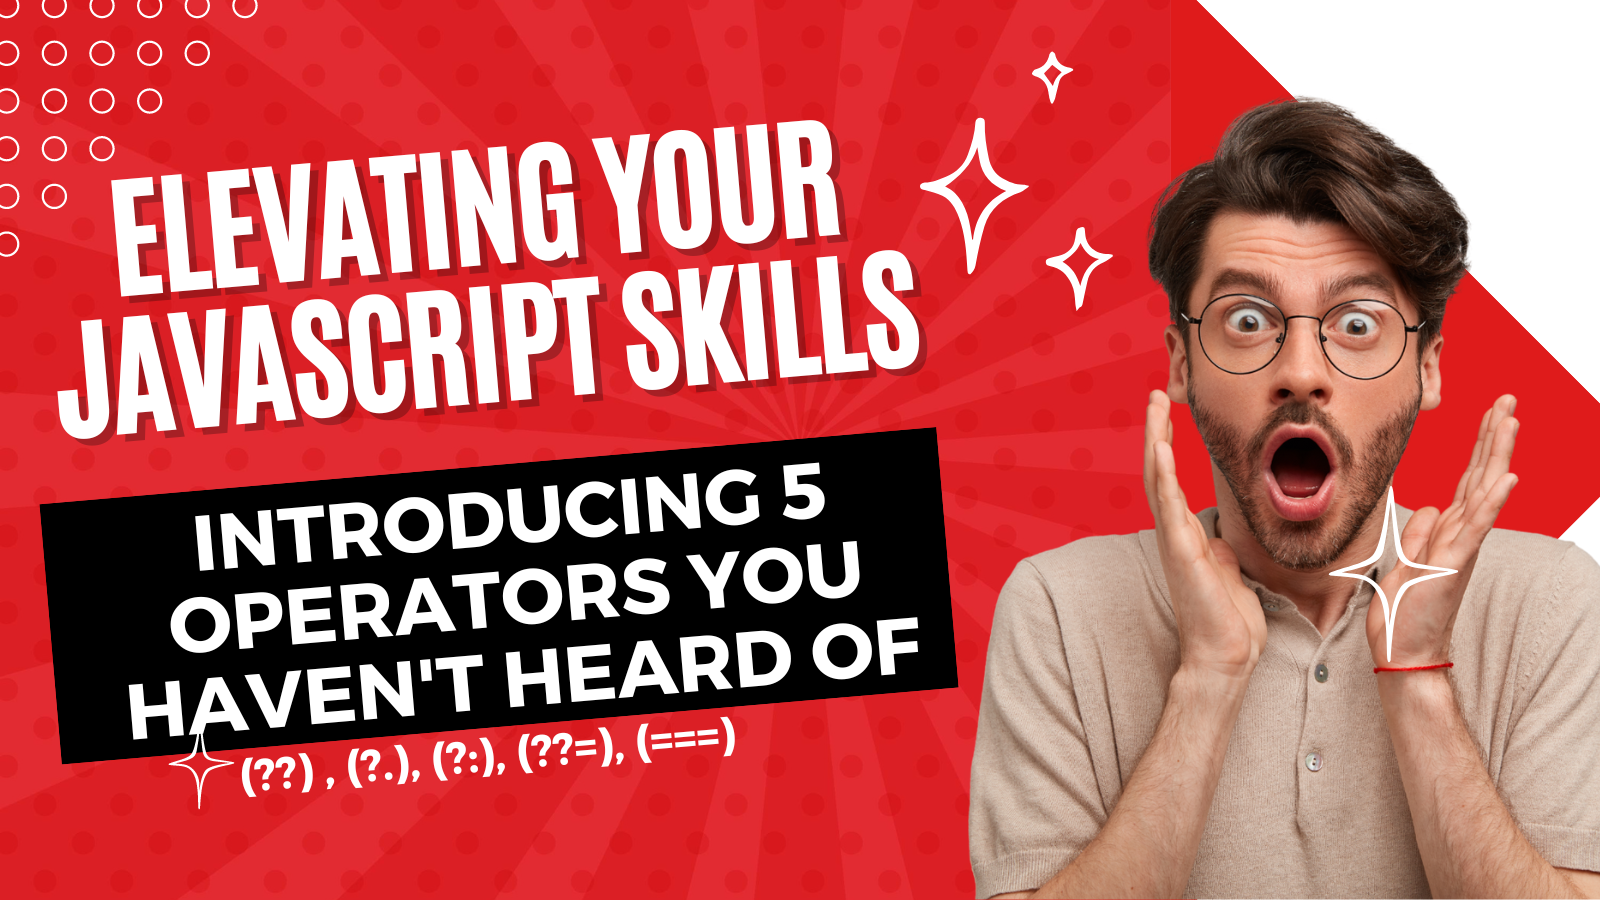 Elevating Your JavaScript Skills: Introducing 5 Operators You Haven’t Heard Of